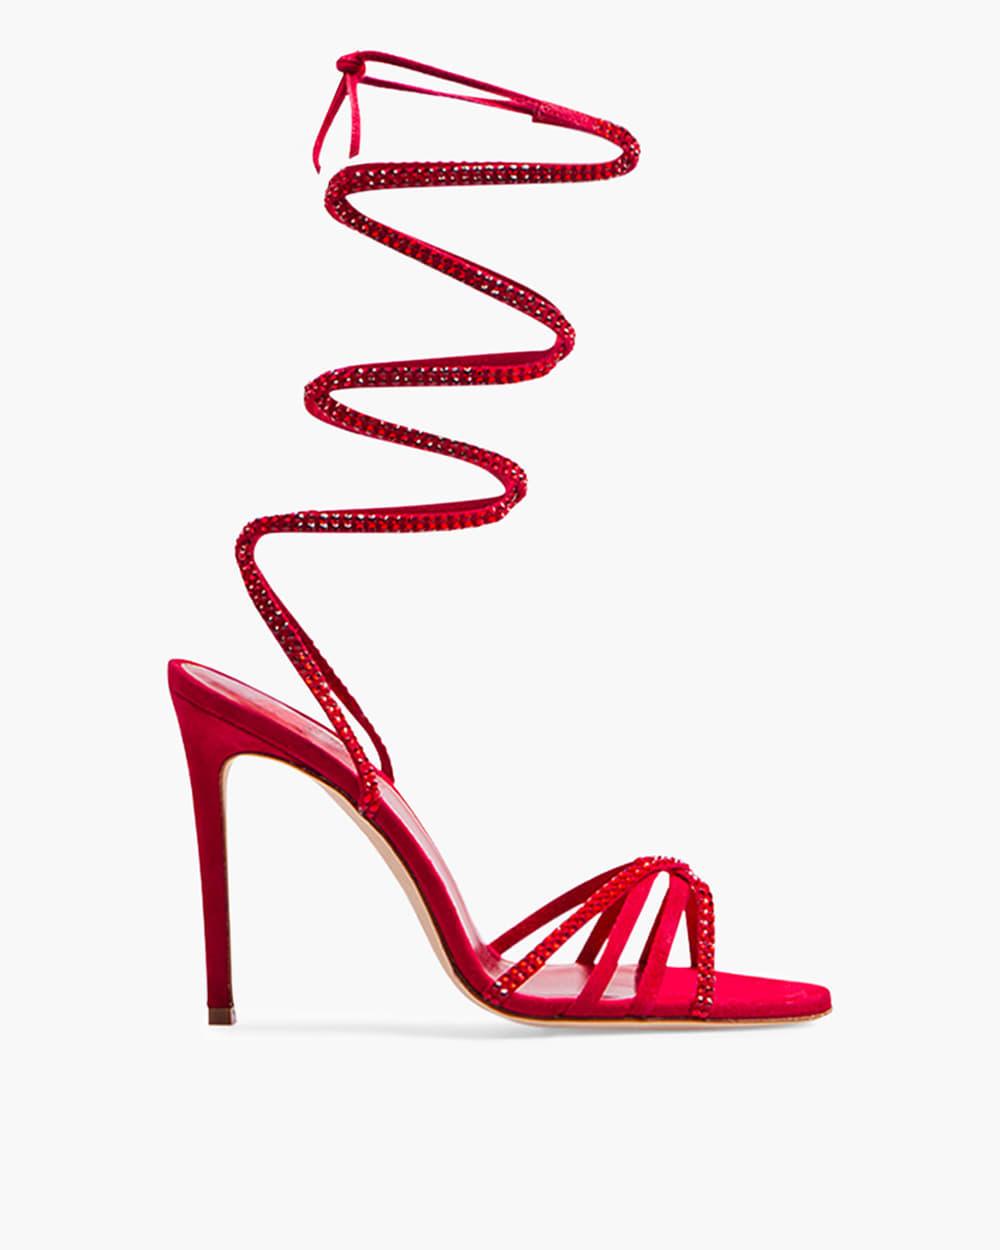 Paris Texas Holly Nicole Lace Up Sandals in Red | Lyst